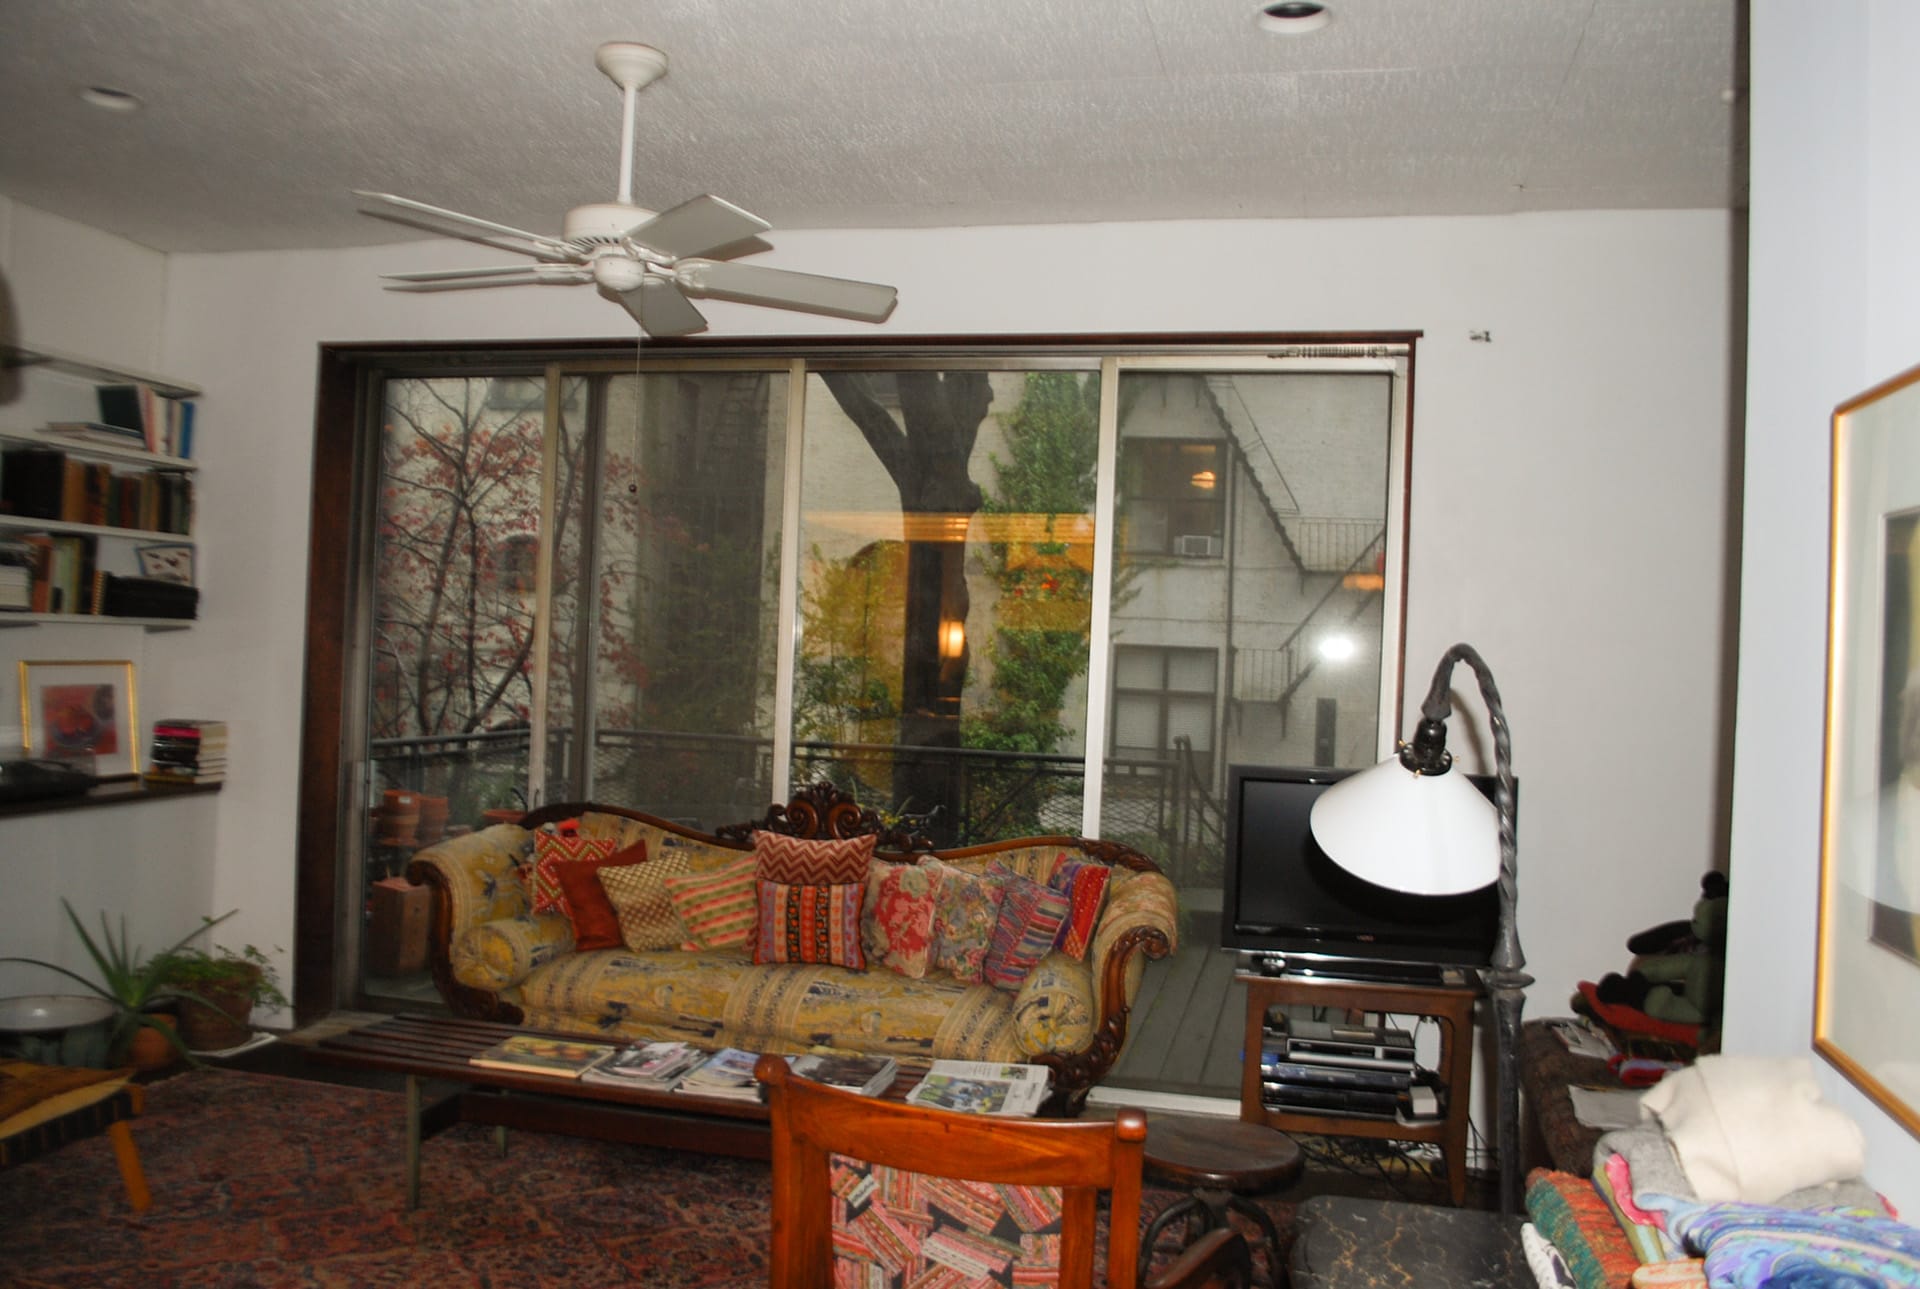 Living room with a patterned couch, ceiling fan, and sliding glass doors to the rear yard. An armchair and floor lamp sit in the foreground.